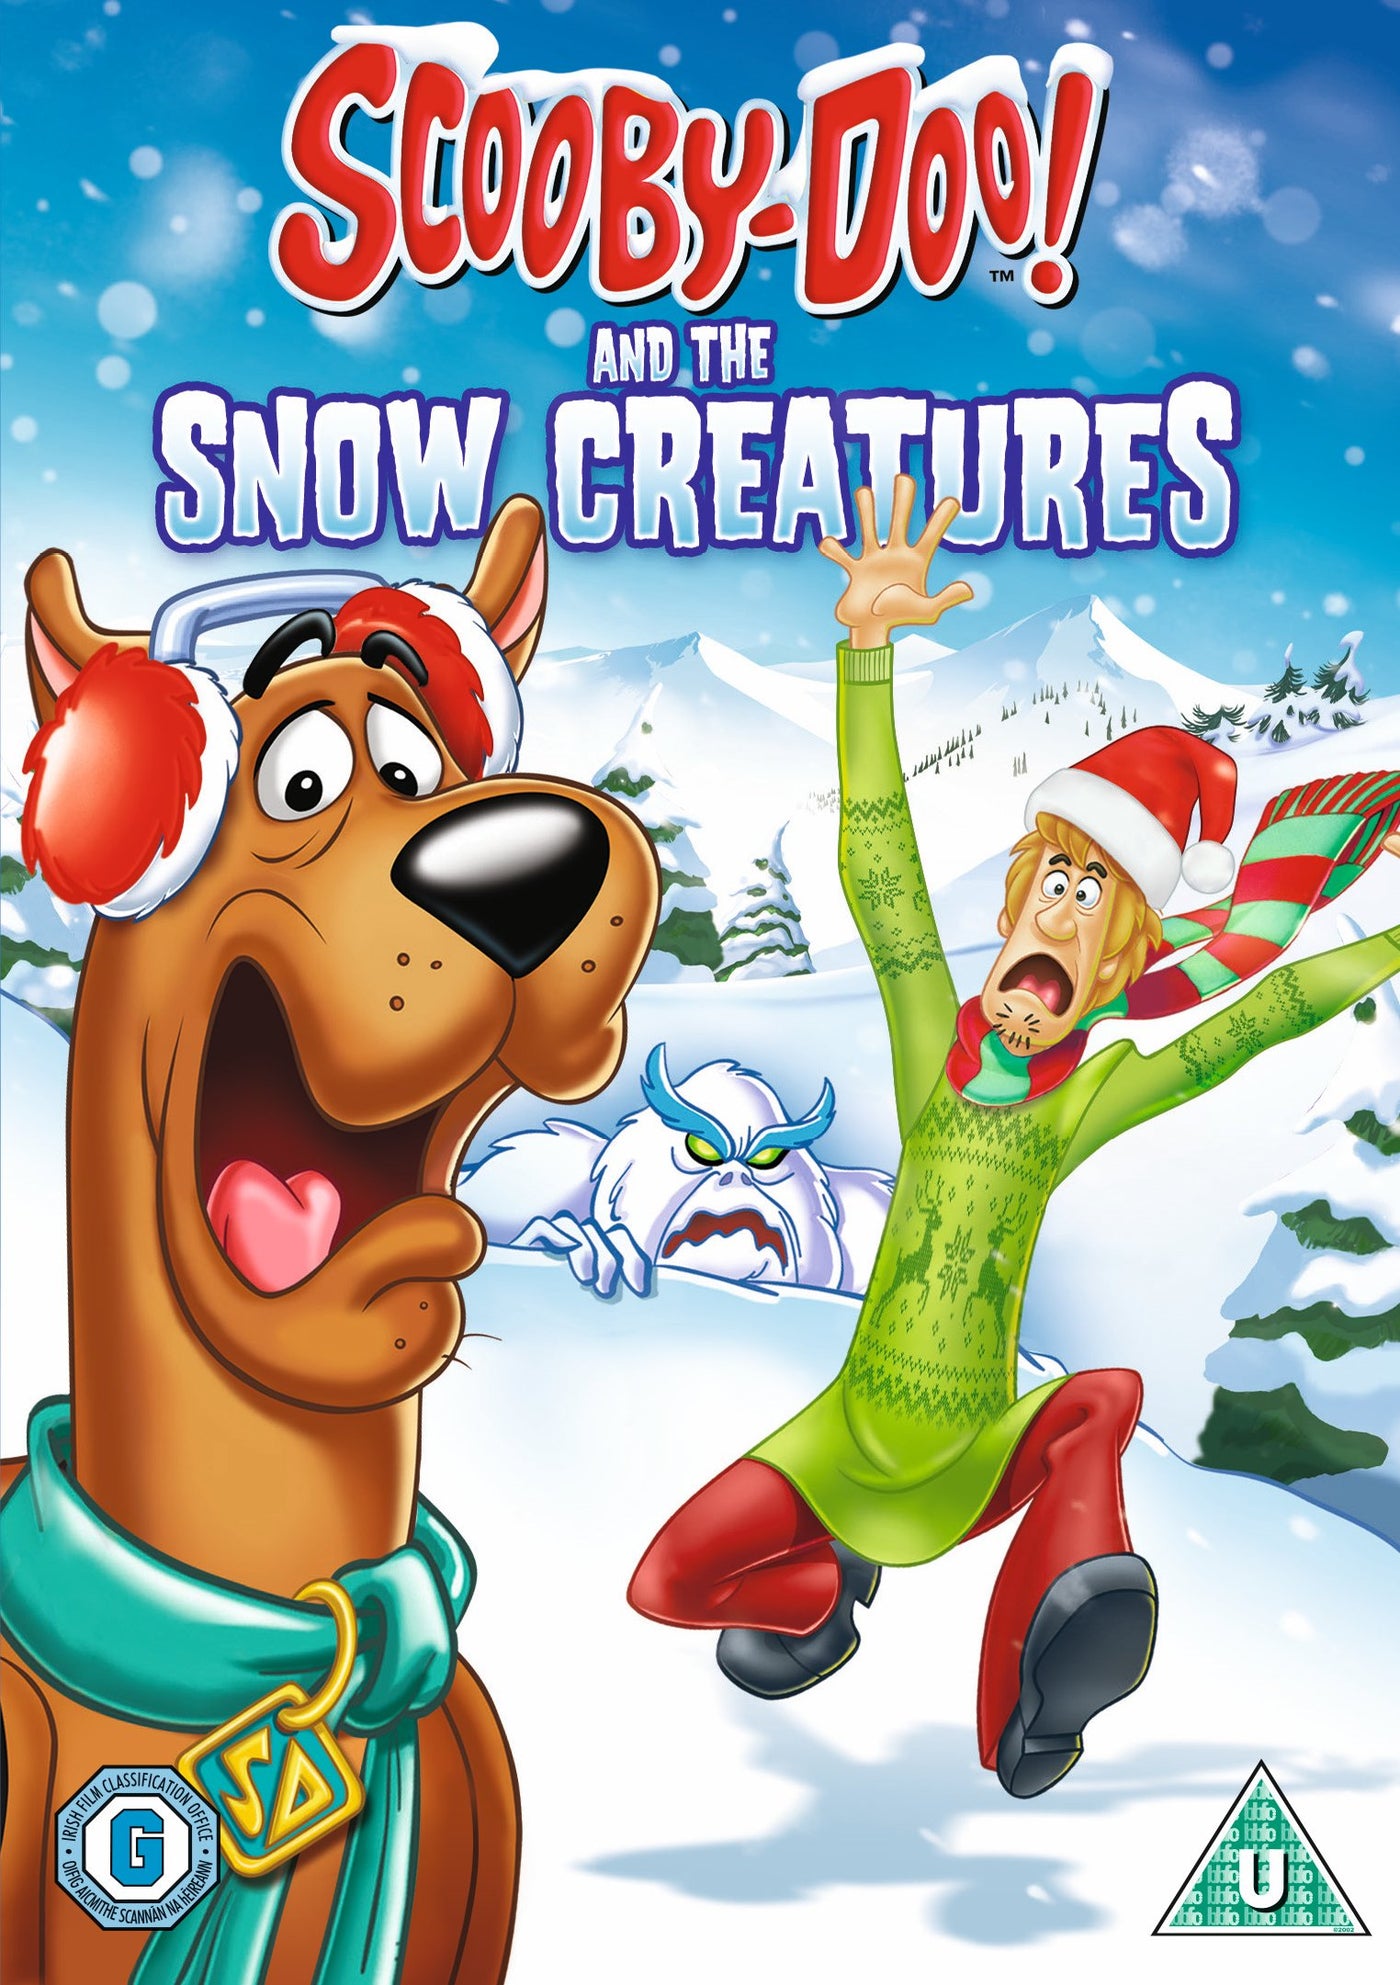 Scooby Doo and the Snow Creatures (DVD)